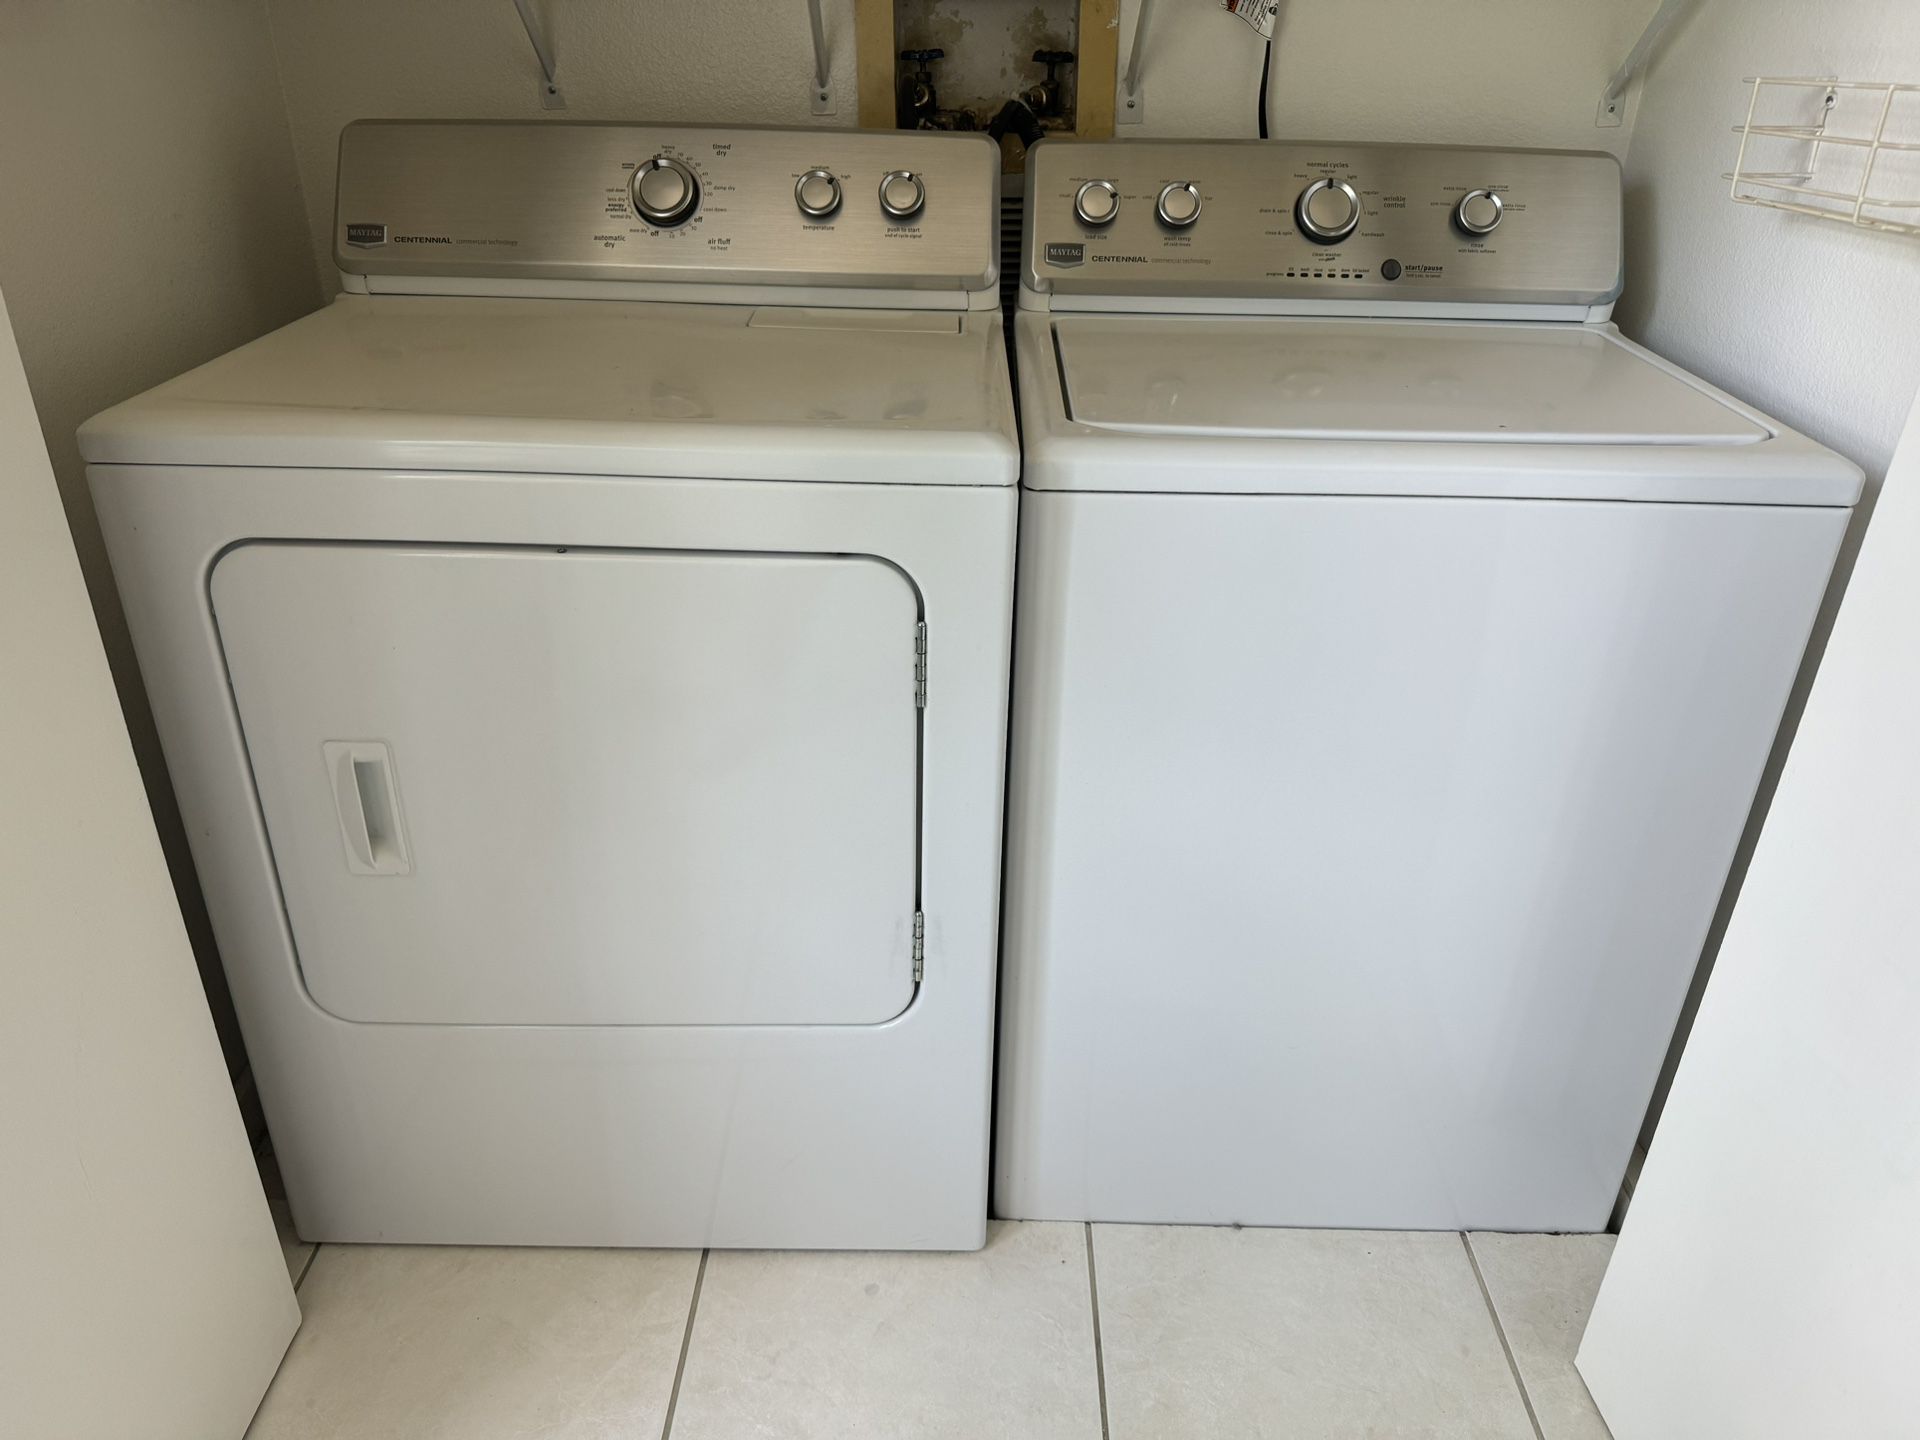 Washer & Dryer $225 each or both for $370